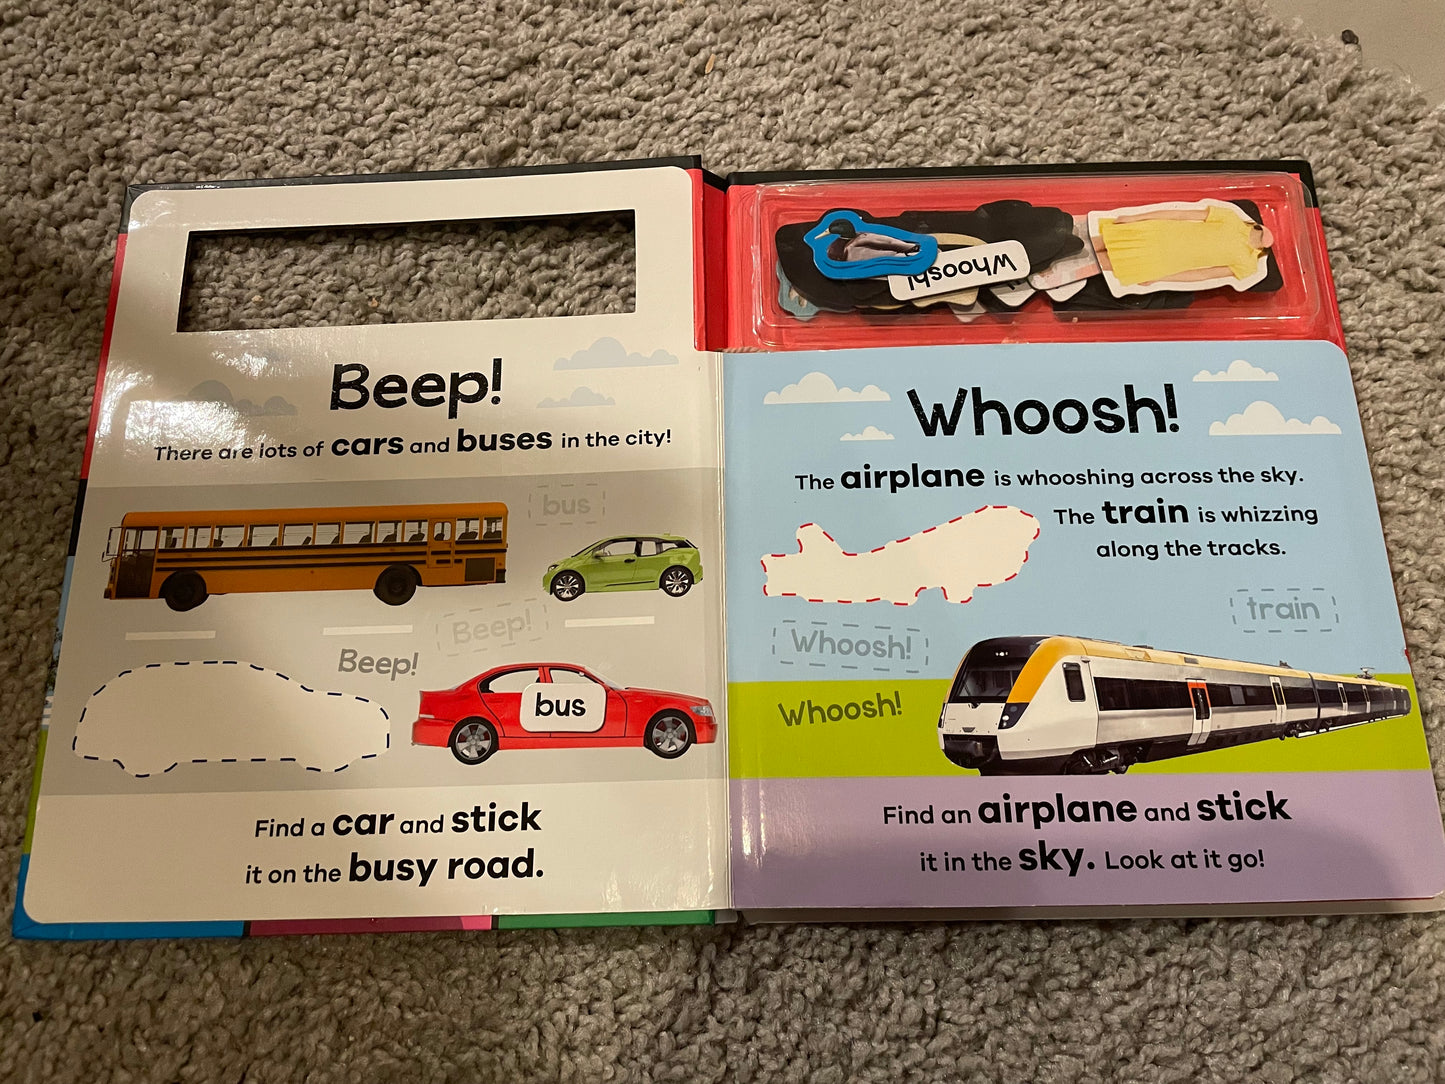 Play & Learn Magnetic First Words Book